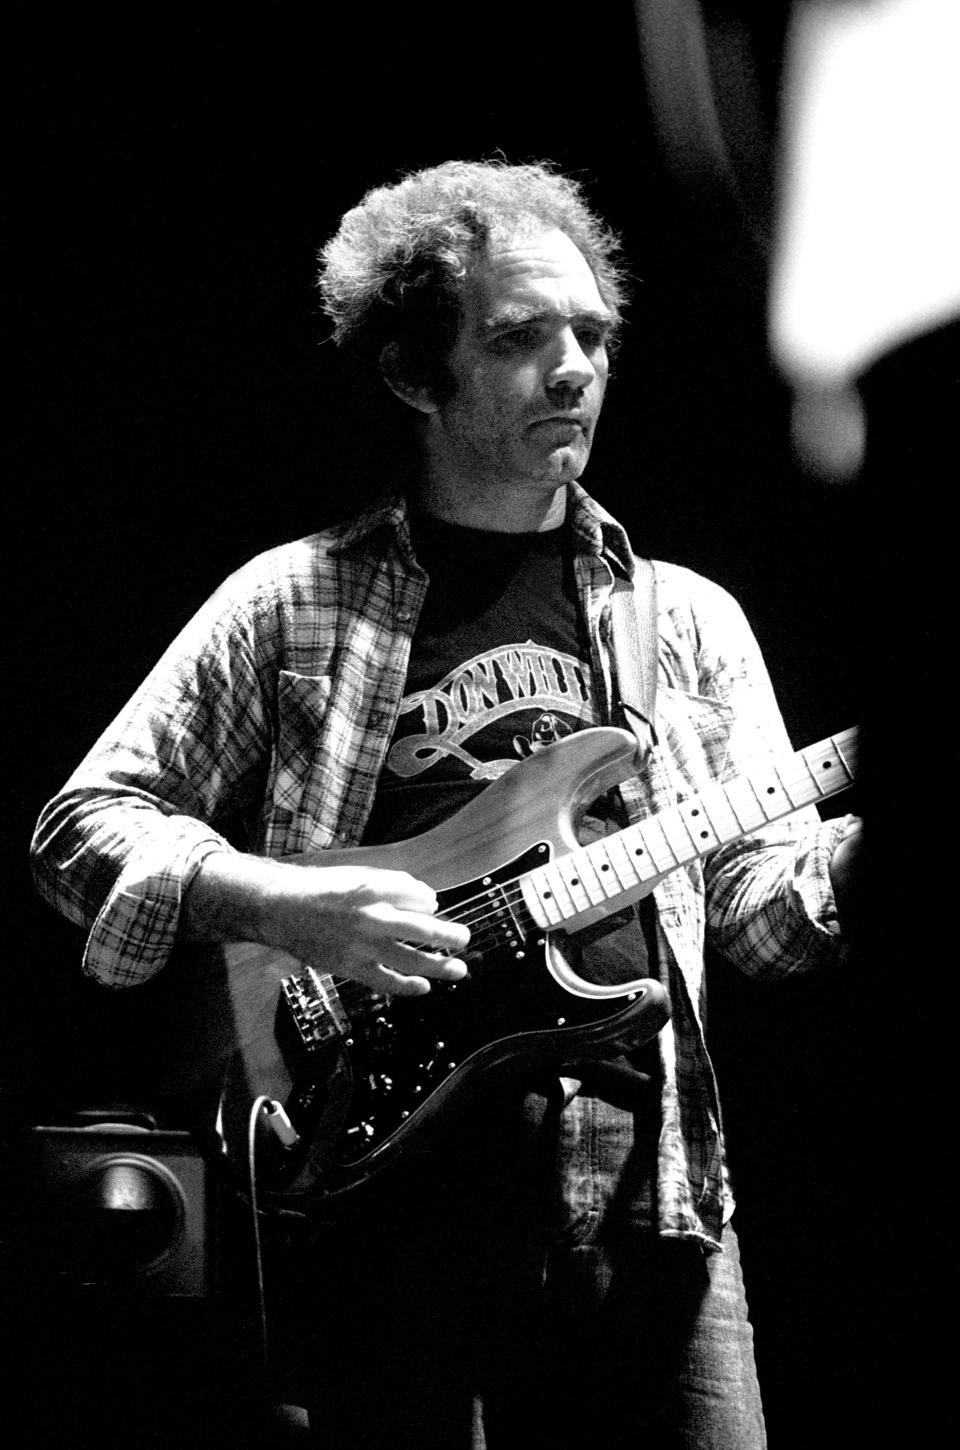 Cale, the singer-songwriter and producer known as the main architect of the Tulsa Sound, <a href="http://www.huffingtonpost.com/2013/07/27/jj-cale-dead-dies_n_3664256.html" target="_blank">died on July 26, 2013</a>. His manager, Mike Kappus, said he died of a heart attack. He was 74.